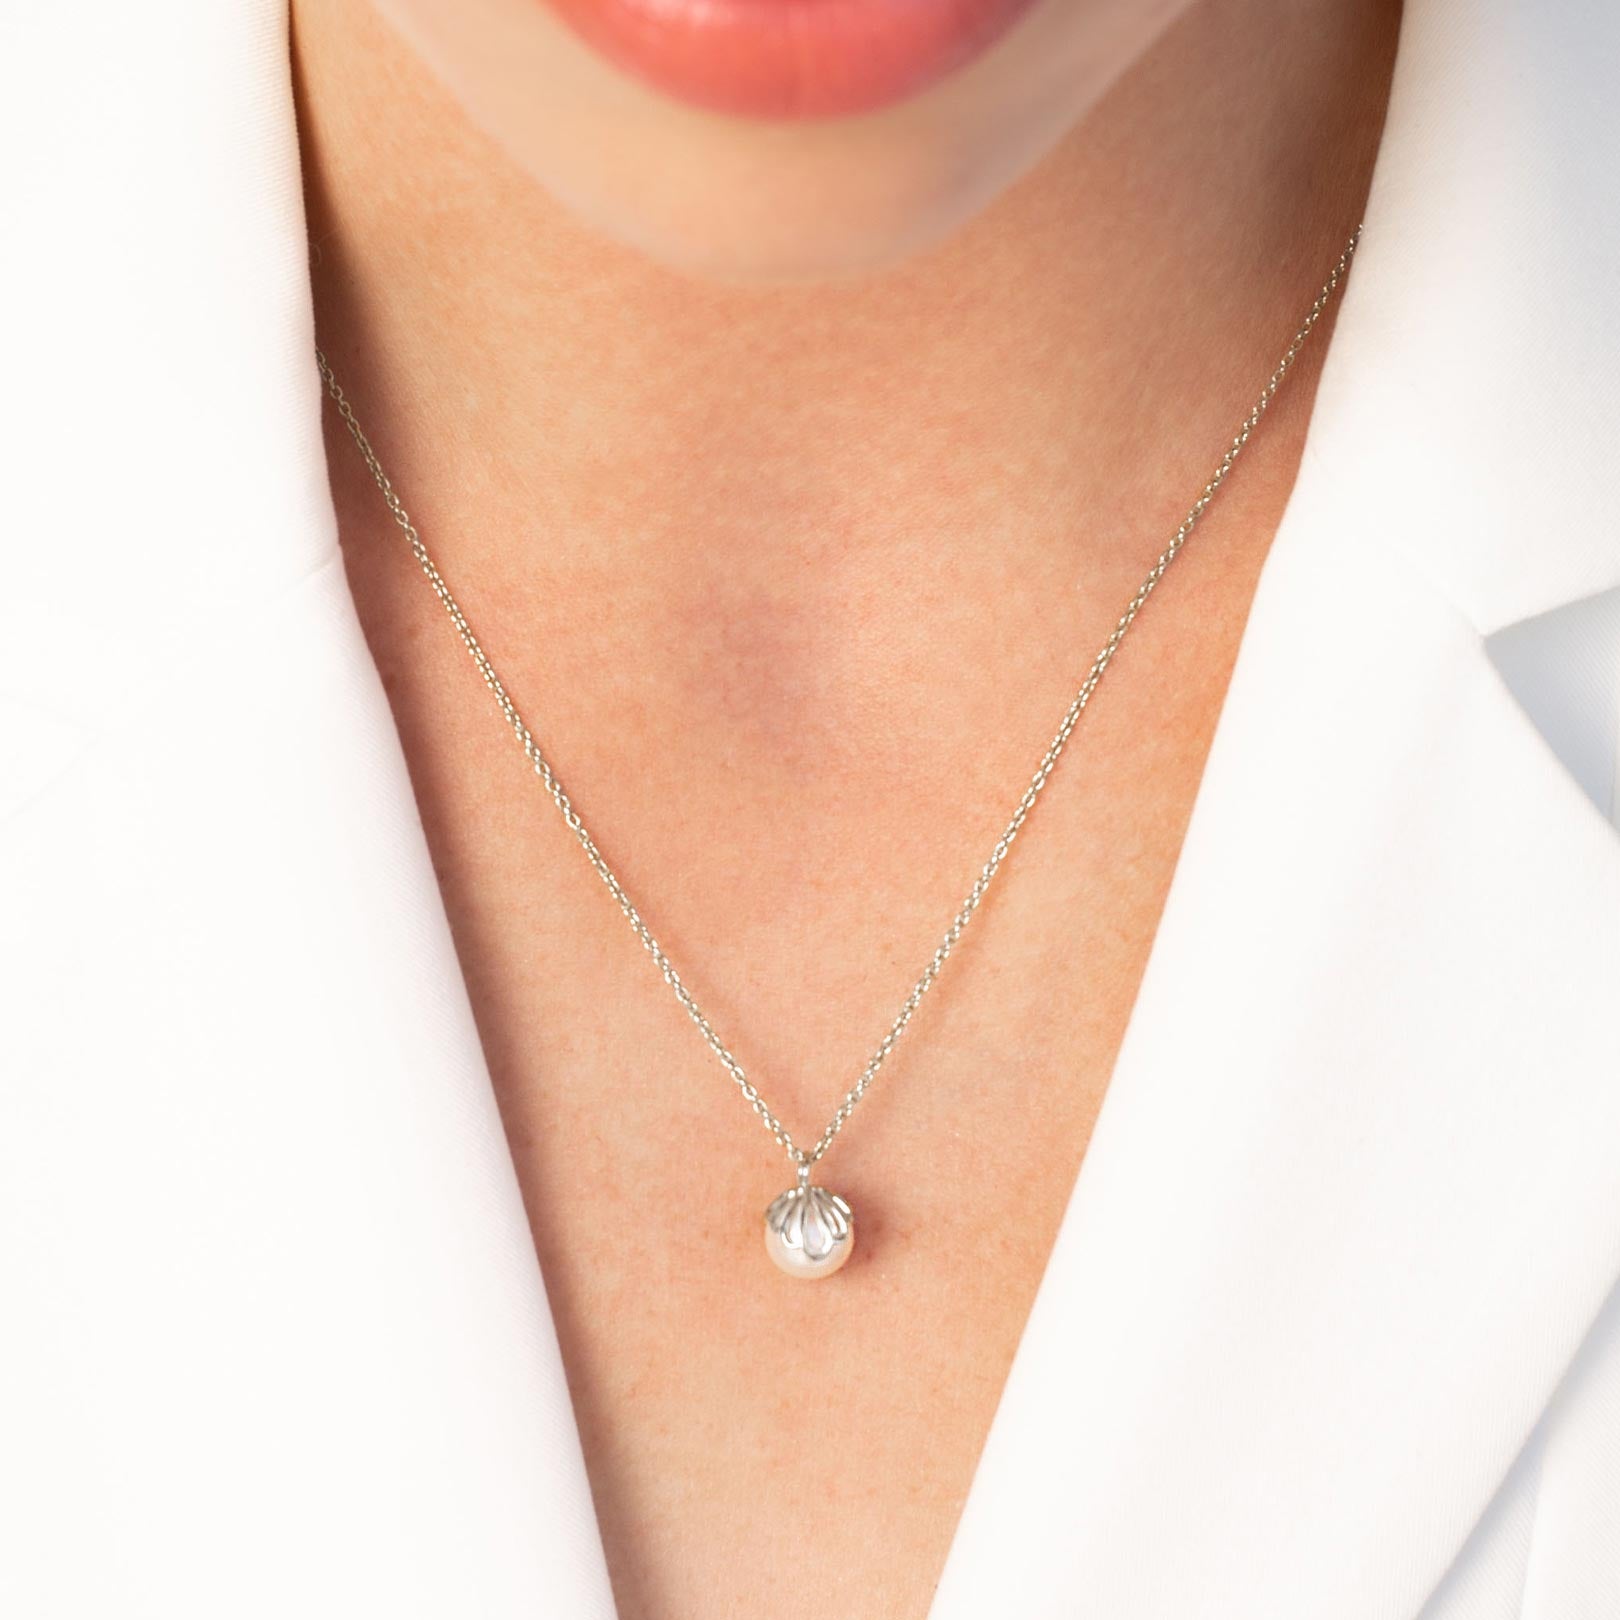 Close up of a christian woman wearing the sterling silver Shell Encased Pearl Necklace from the Becoming Collection by Rizen Jewelry.